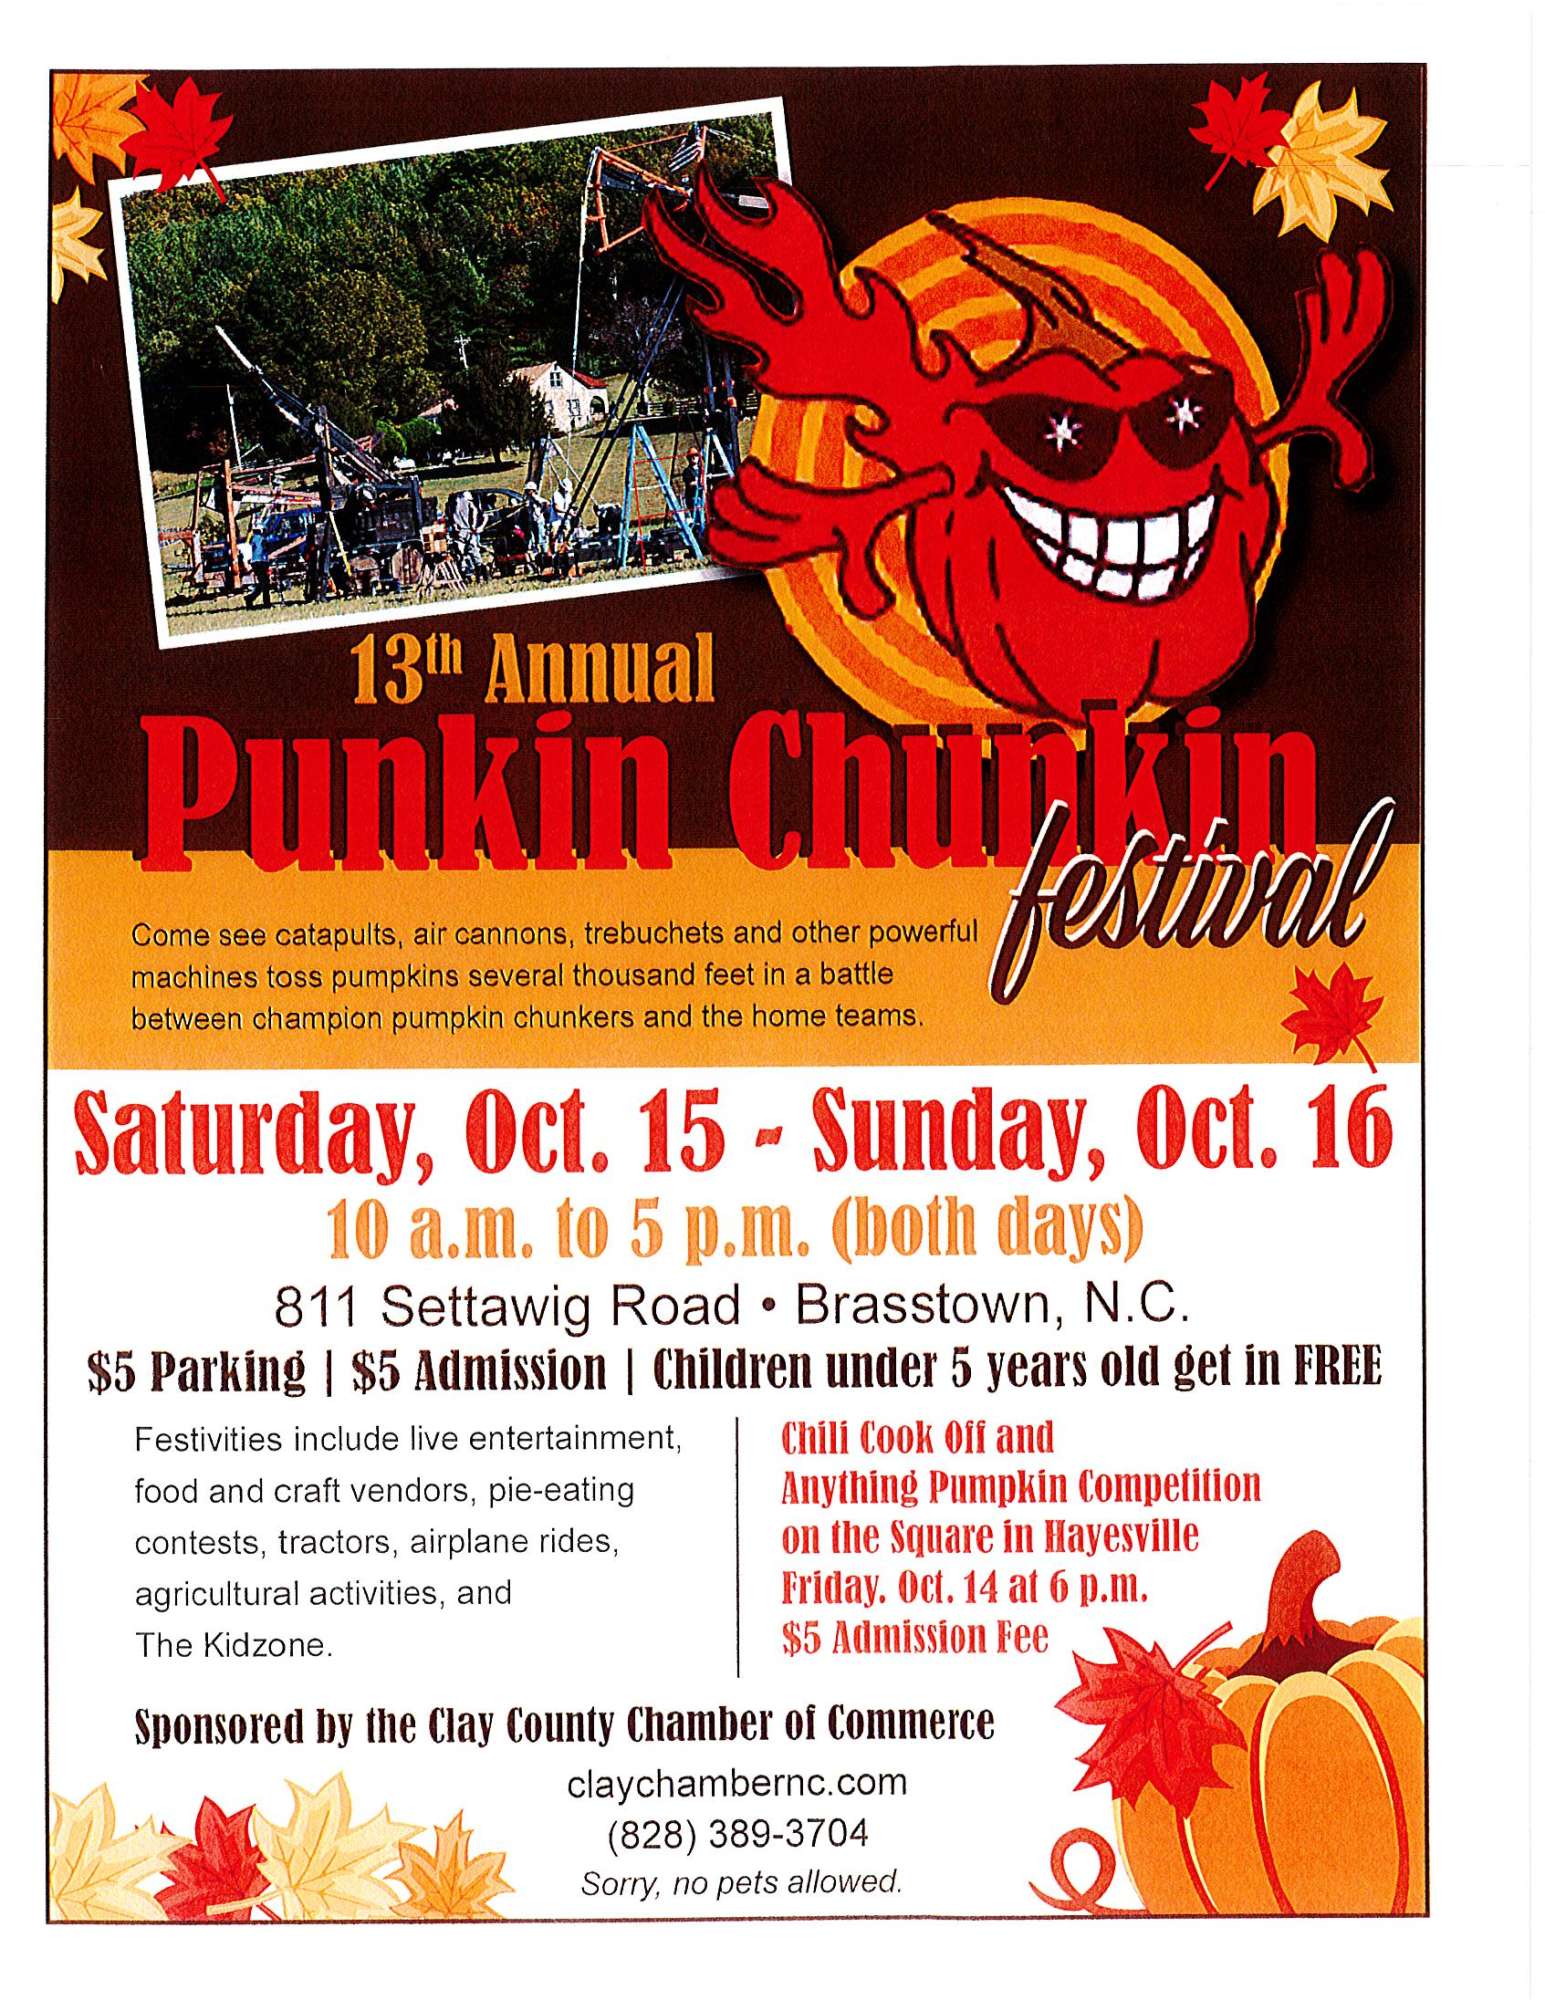 Punkin Chunkin Festival Clay County Chamber of Commerce